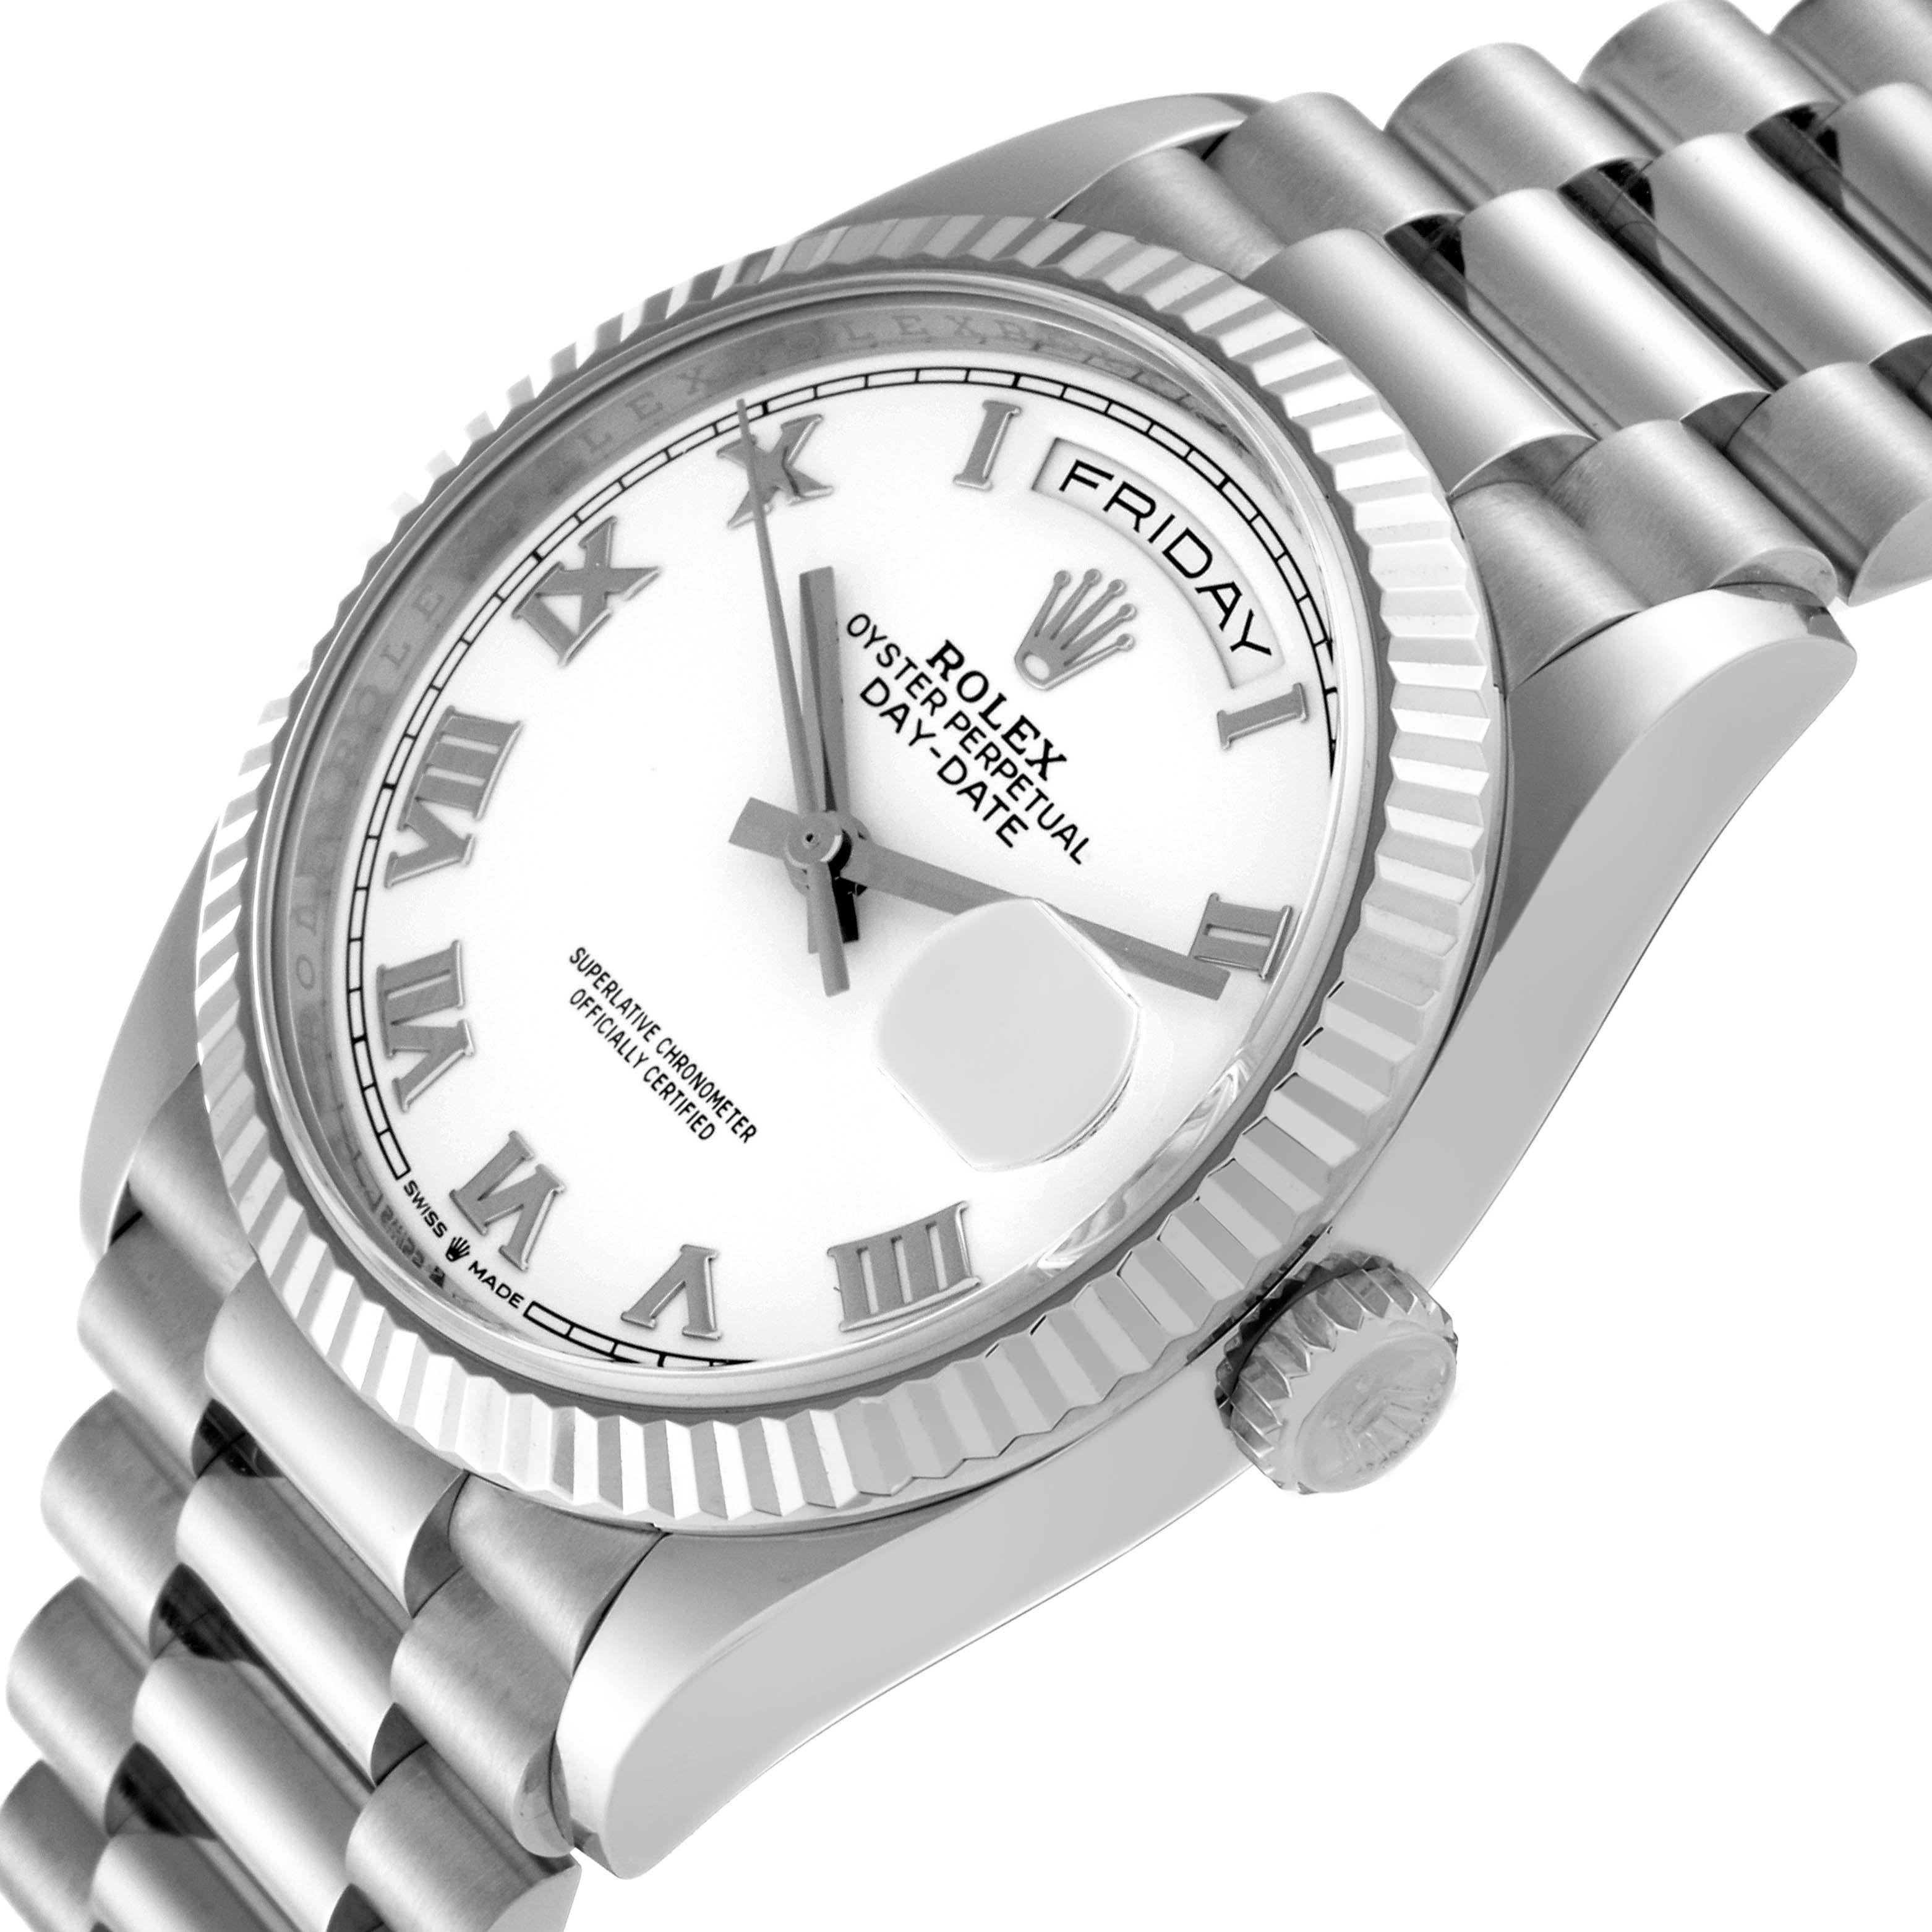 Men's Rolex Day Date 36mm President White Gold White Dial Mens Watch 128239 Box Card For Sale